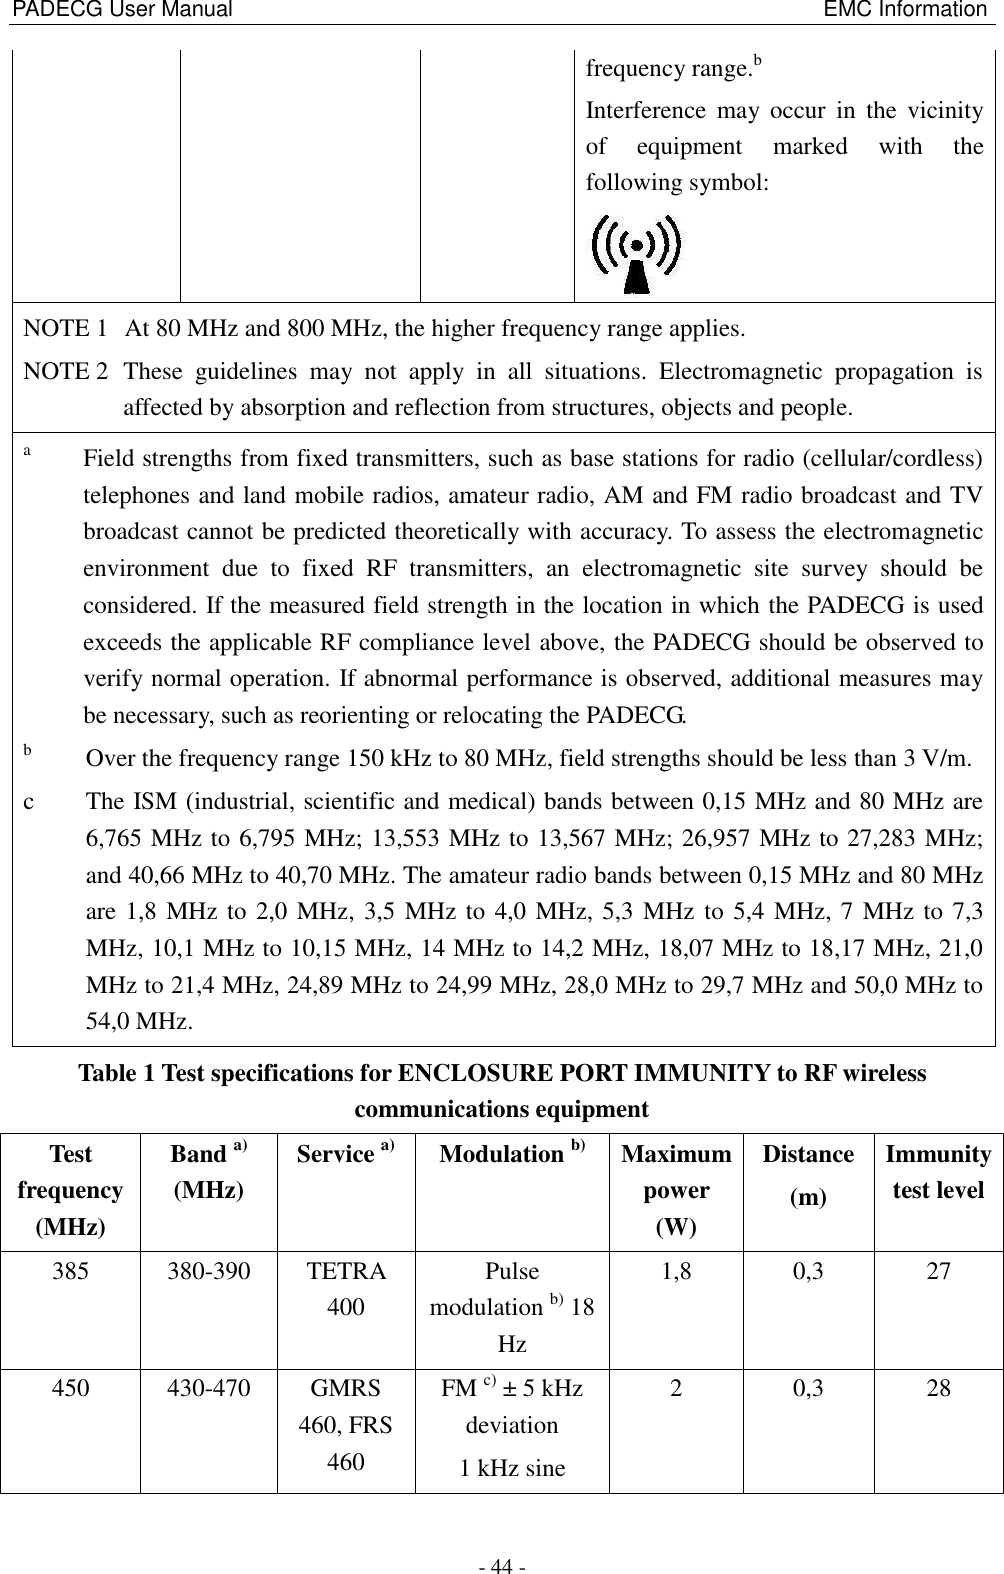 PADECG User Manual                                                                                                            EMC Information - 44 - frequency range.b Interference  may  occur  in  the  vicinity of  equipment  marked  with  the following symbol:  NOTE 1  At 80 MHz and 800 MHz, the higher frequency range applies. NOTE 2  These  guidelines  may  not  apply  in  all  situations.  Electromagnetic  propagation  is affected by absorption and reflection from structures, objects and people. a  Field strengths from fixed transmitters, such as base stations for radio (cellular/cordless) telephones and land mobile radios, amateur radio, AM and FM radio broadcast and TV broadcast cannot be predicted theoretically with accuracy. To assess the electromagnetic environment  due  to  fixed  RF  transmitters,  an  electromagnetic  site  survey  should  be considered. If the measured field strength in the location in which the PADECG is used exceeds the applicable RF compliance level above, the PADECG should be observed to verify normal operation. If abnormal performance is observed, additional measures may be necessary, such as reorienting or relocating the PADECG. b  Over the frequency range 150 kHz to 80 MHz, field strengths should be less than 3 V/m. c    The ISM (industrial, scientific and medical) bands between 0,15 MHz and 80 MHz are 6,765 MHz to 6,795 MHz; 13,553 MHz to 13,567 MHz; 26,957 MHz to 27,283 MHz; and 40,66 MHz to 40,70 MHz. The amateur radio bands between 0,15 MHz and 80 MHz are 1,8 MHz to 2,0 MHz, 3,5 MHz to 4,0 MHz, 5,3 MHz to 5,4 MHz, 7 MHz to 7,3 MHz, 10,1 MHz to 10,15 MHz, 14 MHz to 14,2 MHz, 18,07 MHz to 18,17 MHz, 21,0 MHz to 21,4 MHz, 24,89 MHz to 24,99 MHz, 28,0 MHz to 29,7 MHz and 50,0 MHz to 54,0 MHz. Table 1 Test specifications for ENCLOSURE PORT IMMUNITY to RF wireless communications equipment Test frequency (MHz) Band a) (MHz) Service a) Modulation b) Maximum power (W) Distance (m) Immunity test level 385 380-390 TETRA 400 Pulse modulation b) 18 Hz 1,8 0,3 27 450 430-470 GMRS 460, FRS 460 FM c) ± 5 kHz deviation 1 kHz sine 2   0,3   28 